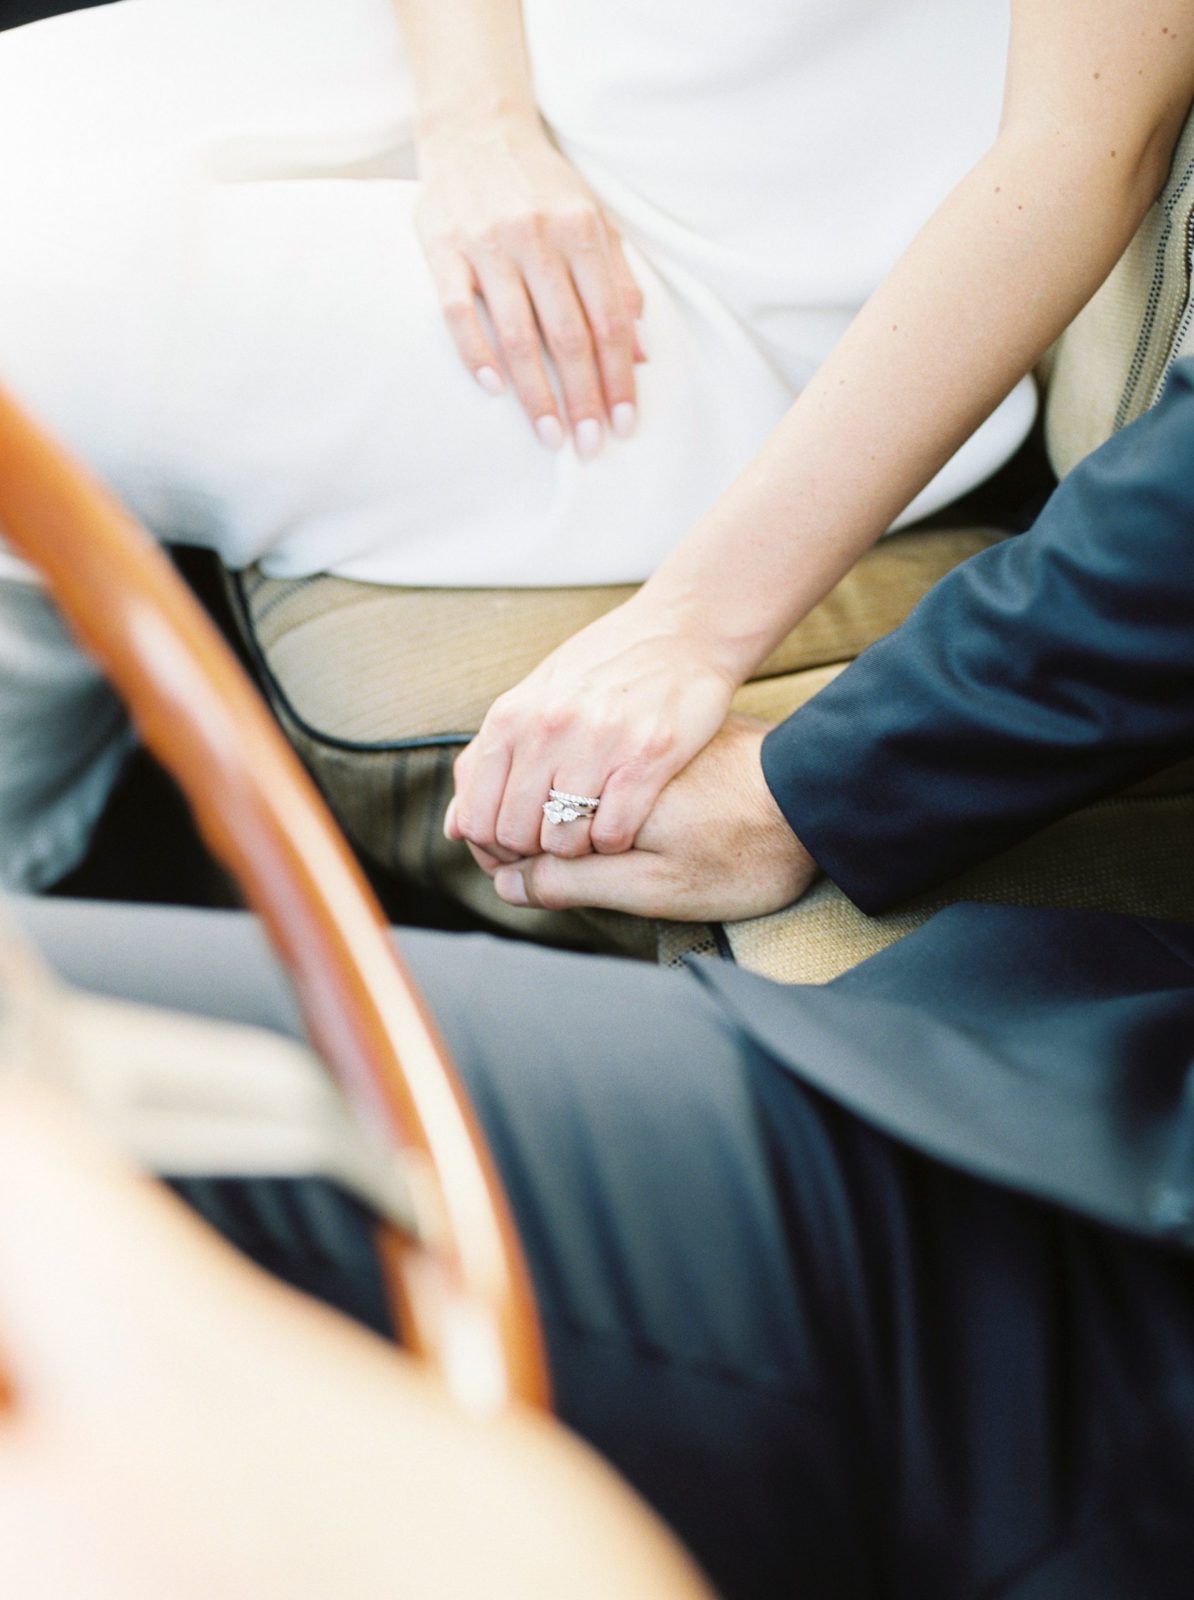 Bride and groom seated in a truck interior holding hands